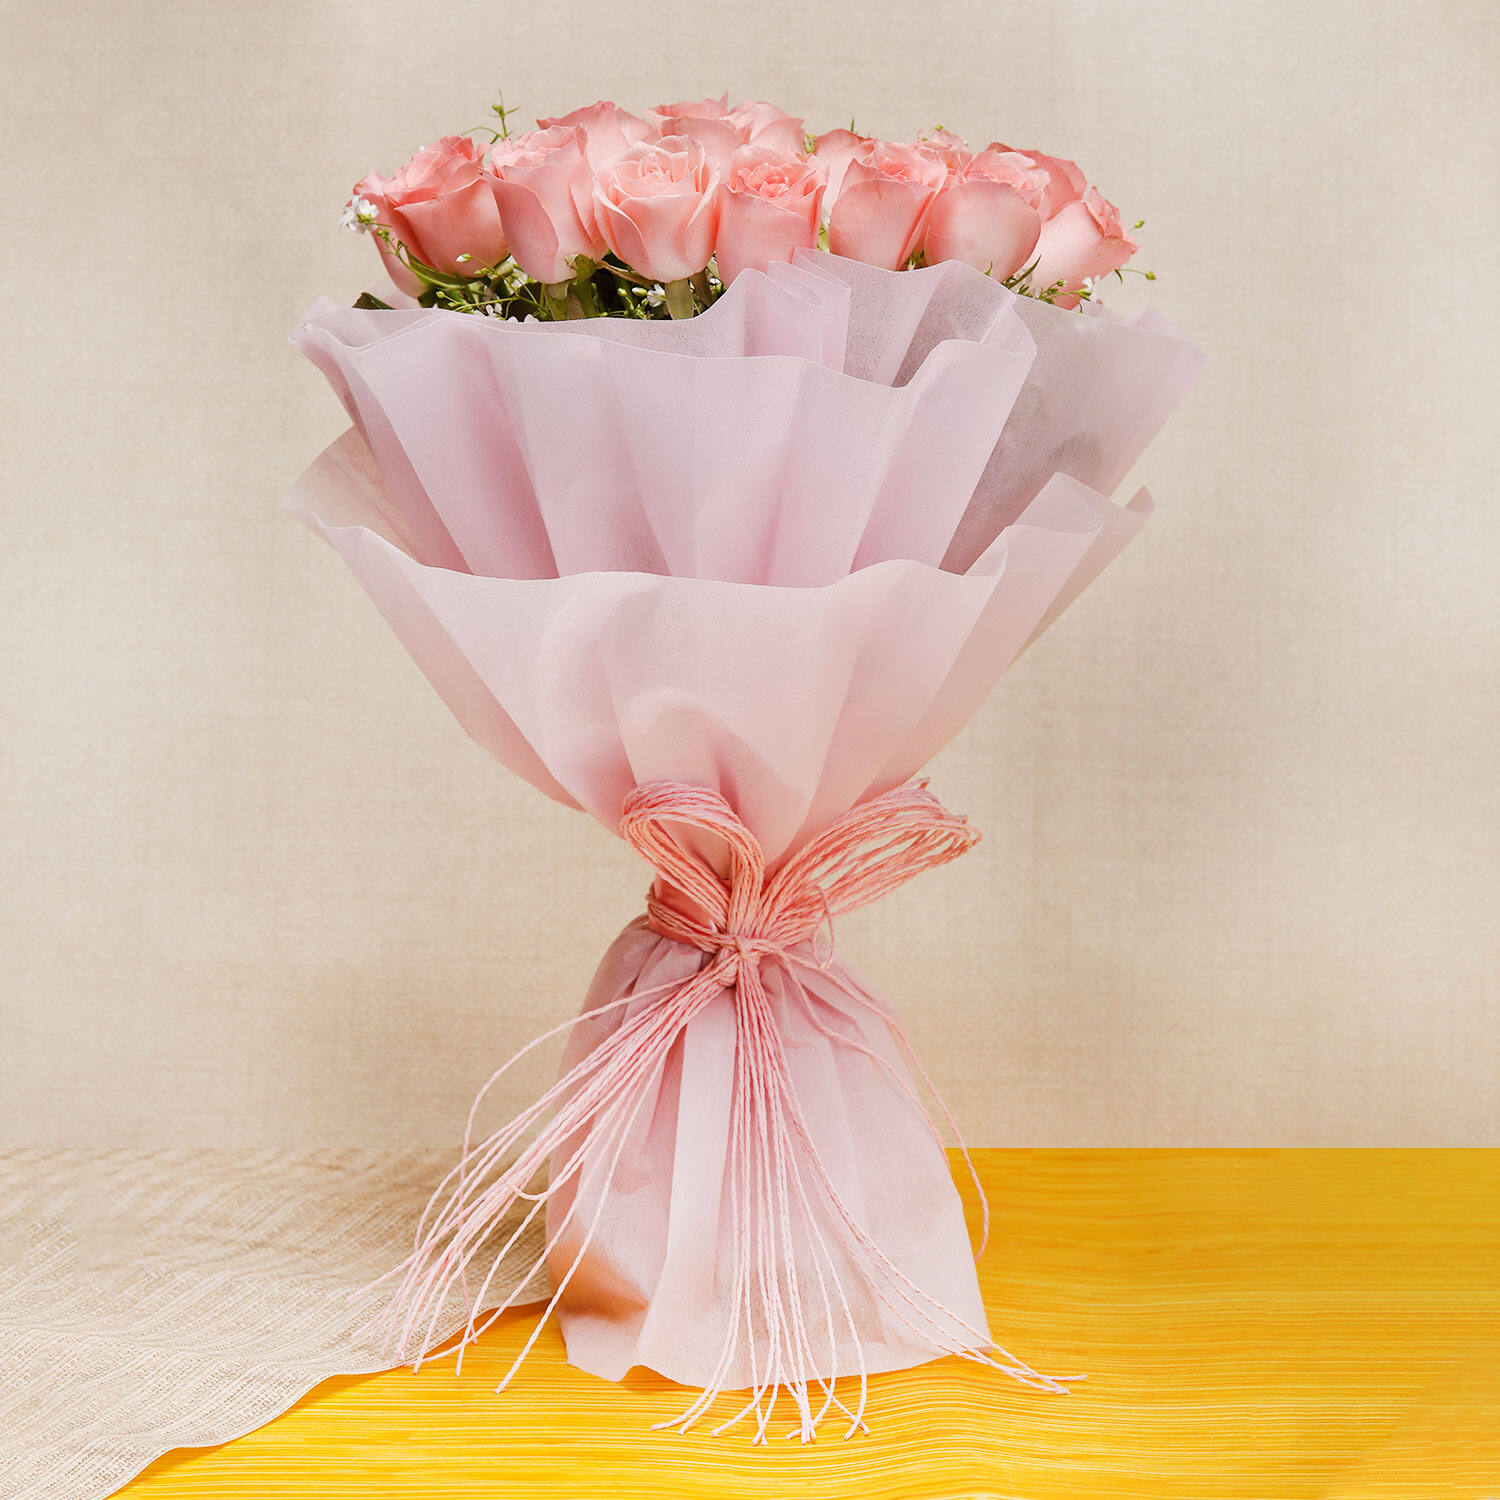 Artificial Fake Rose Simulation Roses Order Flowers Onlines Home Decoration  For Wedding Valentine Mother Day Gift Order Flowers Online From Cosybag,  $1.24 | DHgate.Com